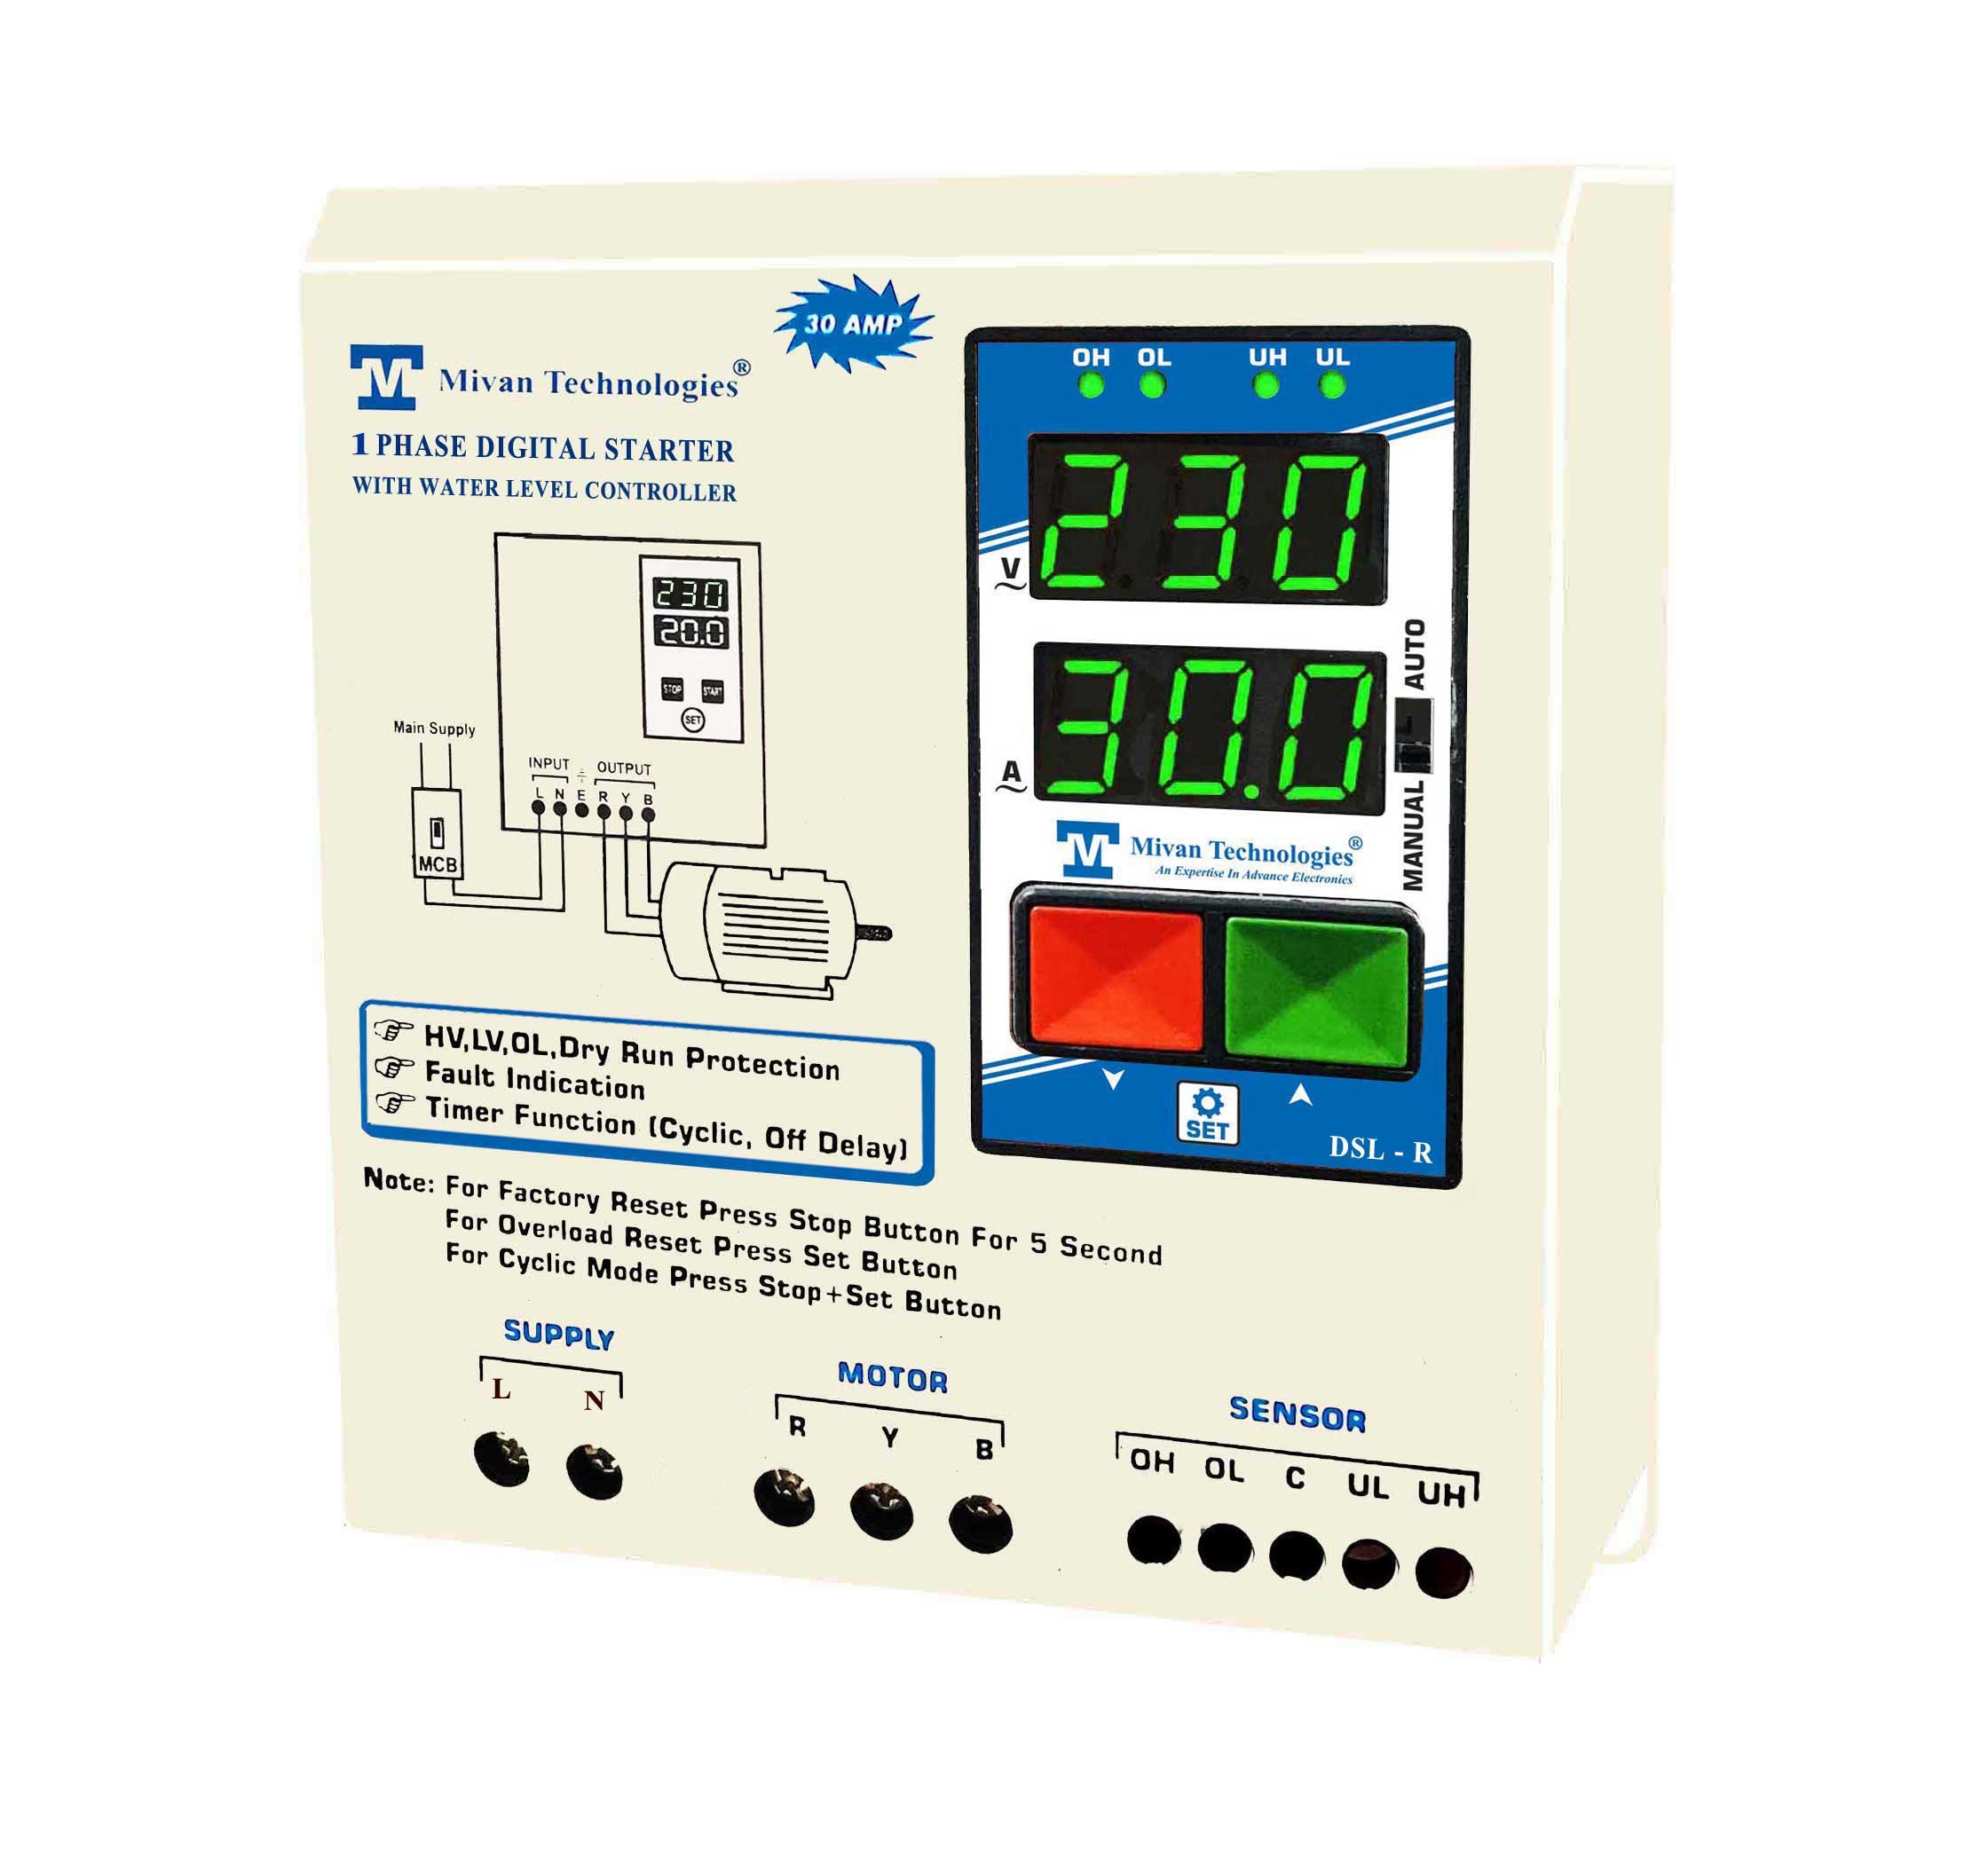 DSL R Digital water level controller and starter panel with HV LV OL DRY protection with cyclic timer and delay timer